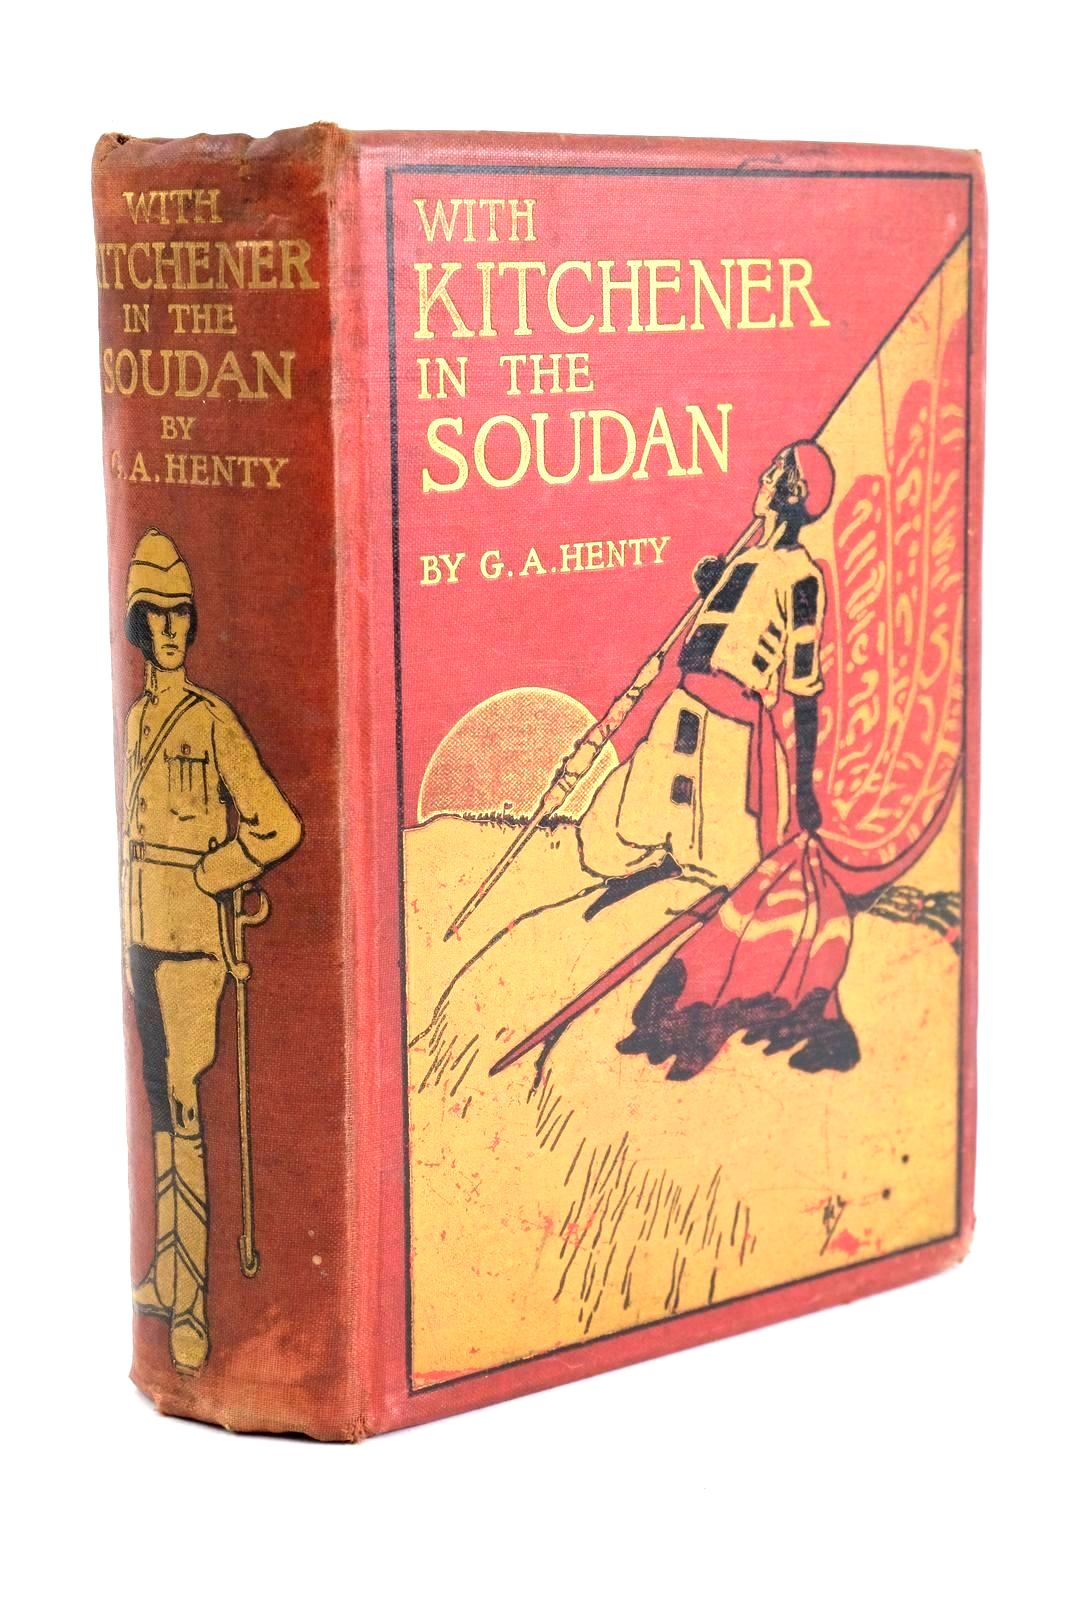 Photo of WITH KITCHENER IN THE SOUDAN written by Henty, G.A. illustrated by Rainey, William published by Blackie & Son Ltd. (STOCK CODE: 1324489)  for sale by Stella & Rose's Books